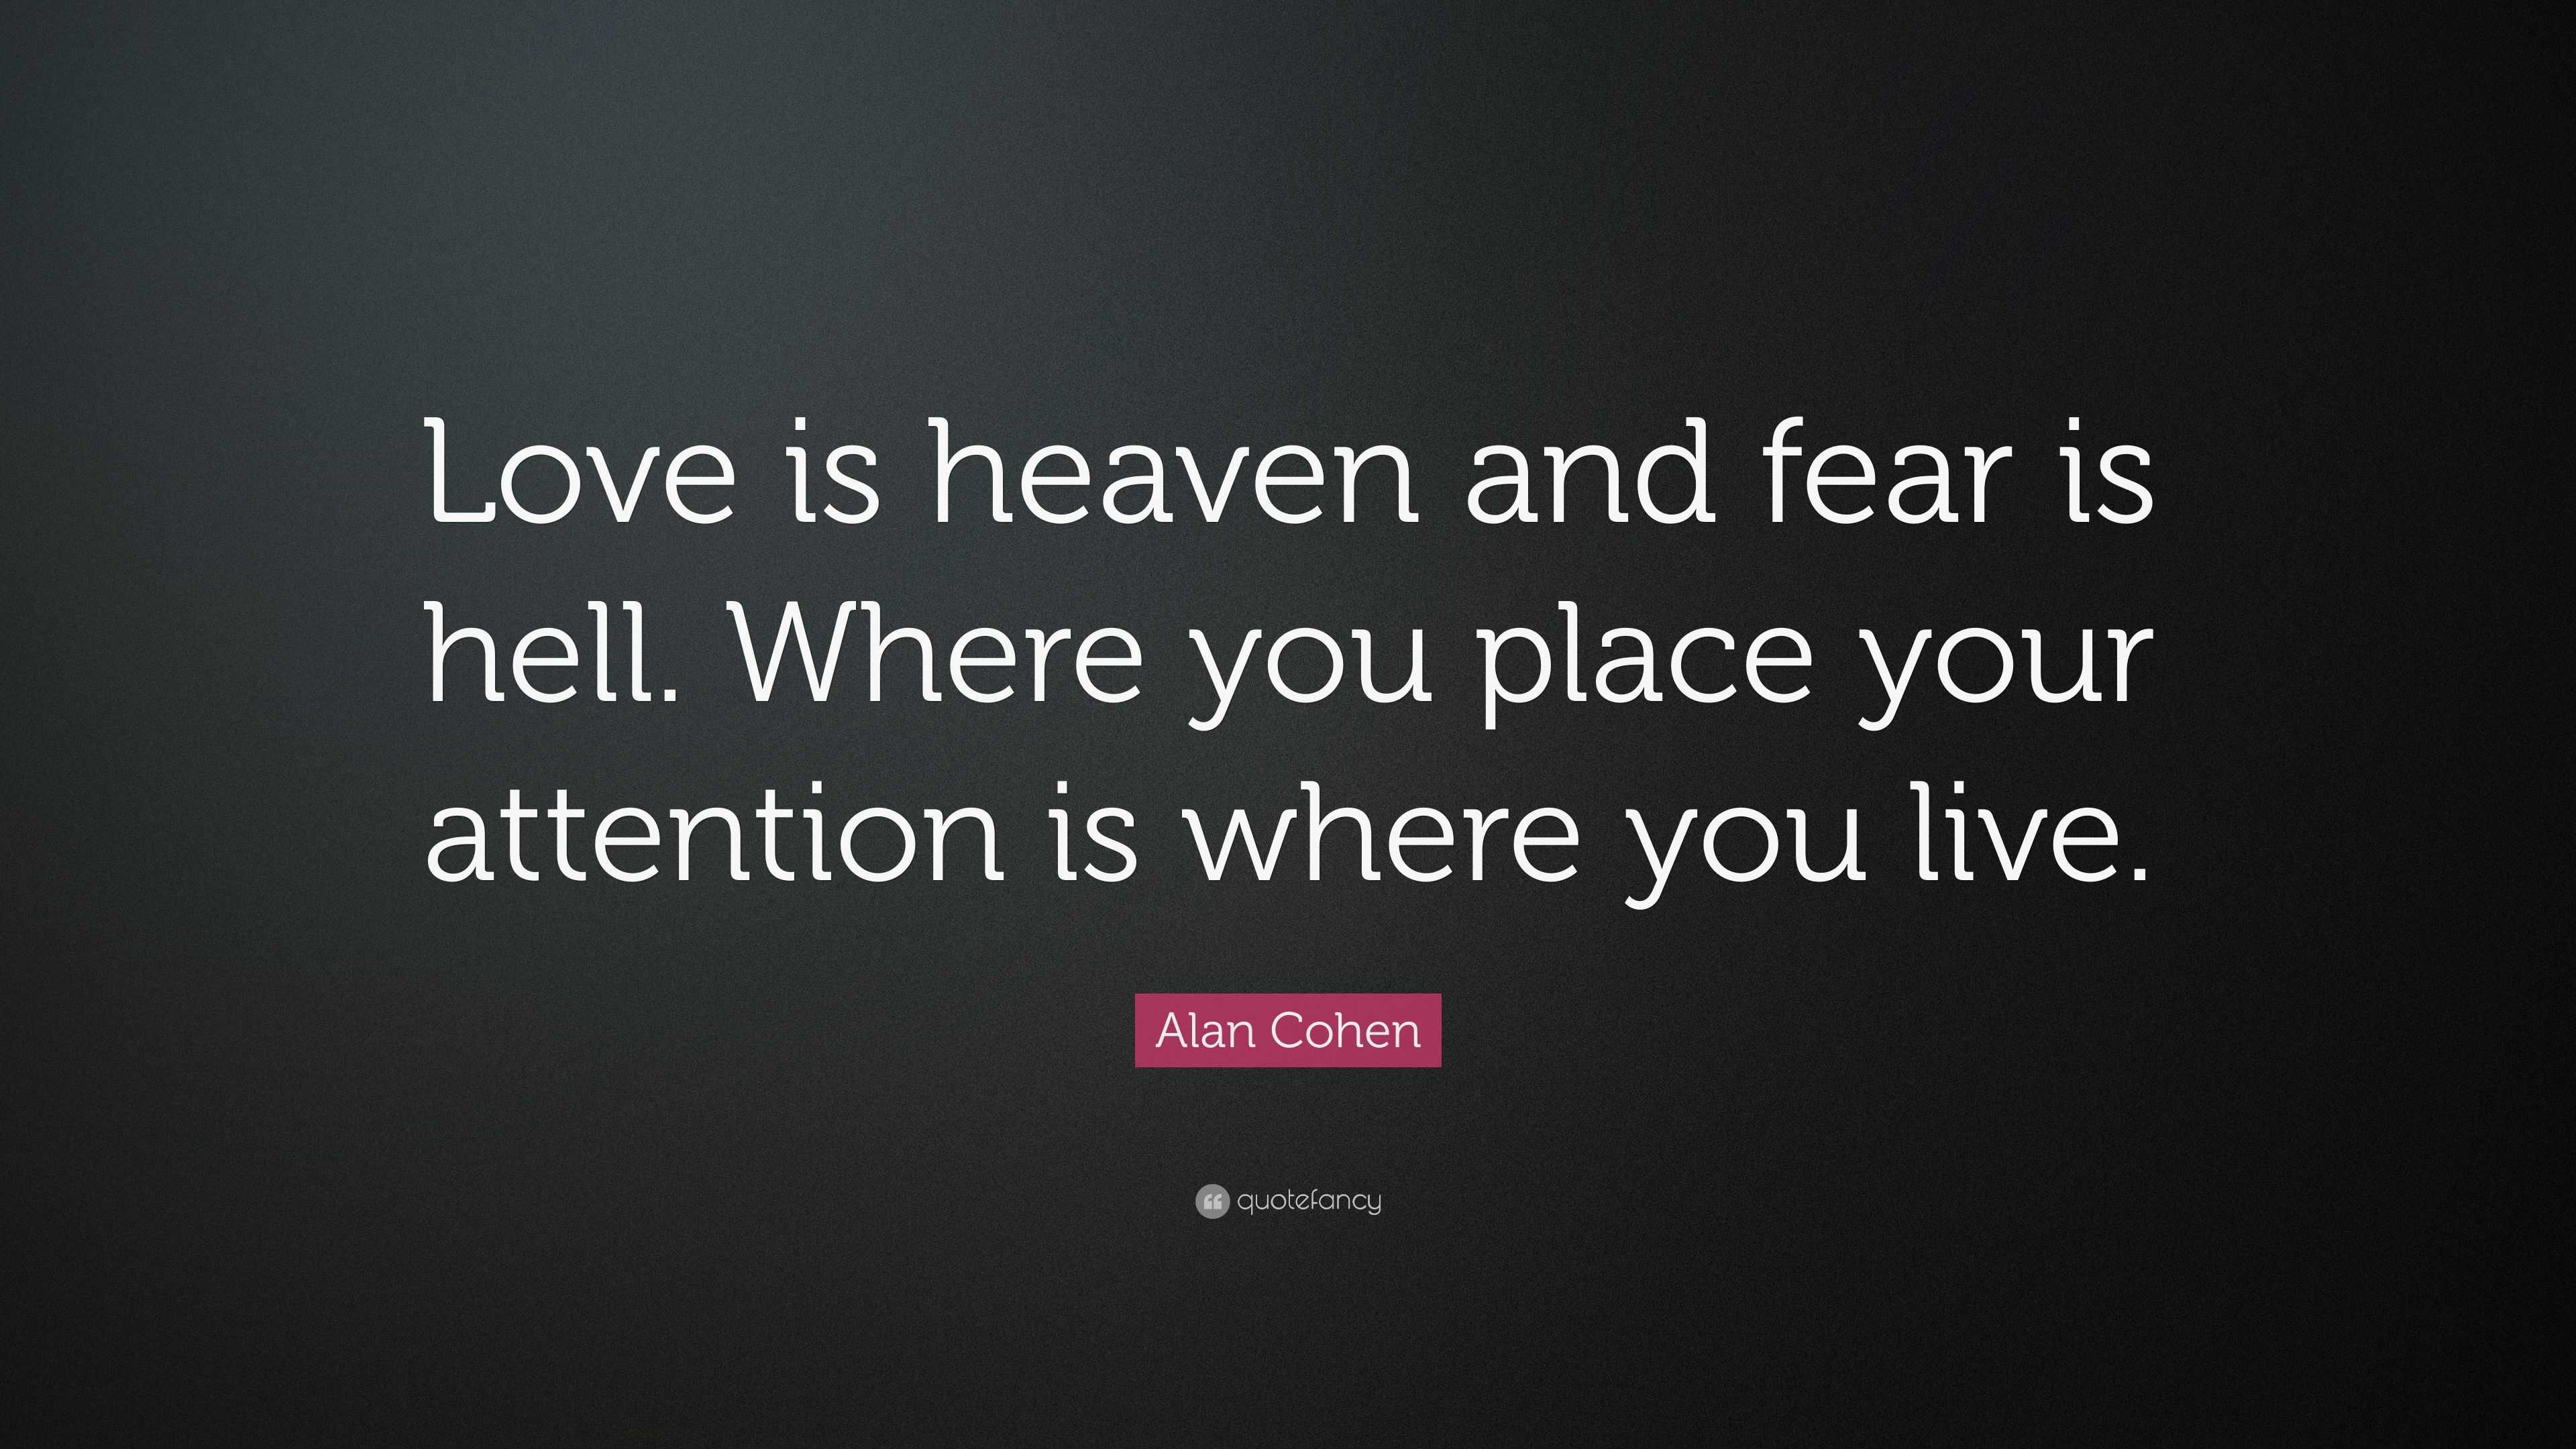 Alan Cohen Quote “Love is heaven and fear is hell Where you place